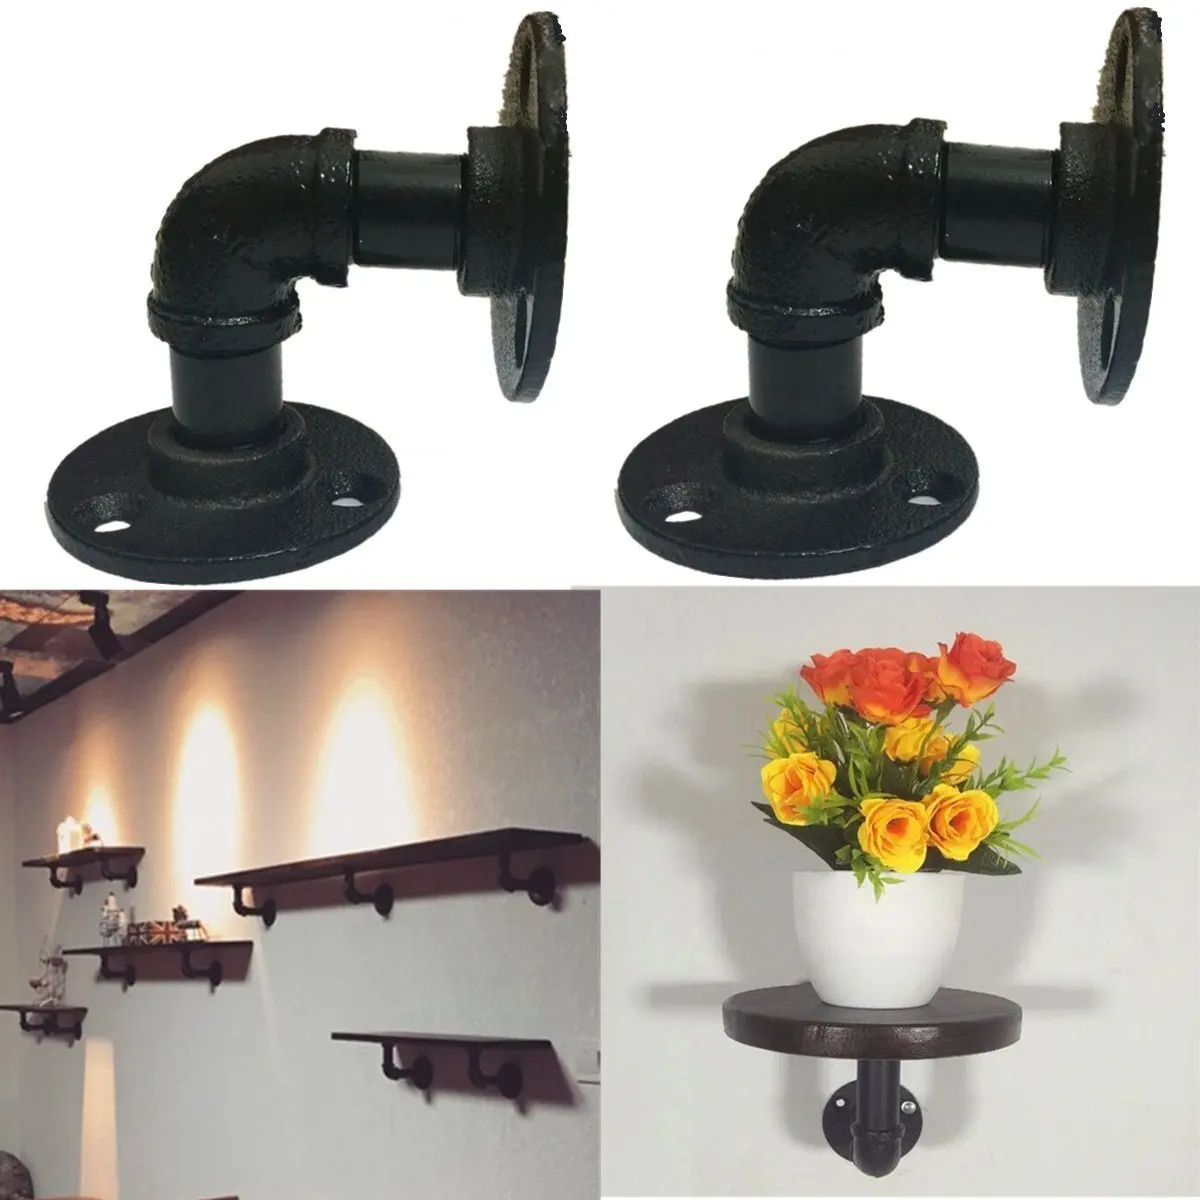 Cheap Pvc Pipe Shelves Find Pvc Pipe Shelves Deals On Line At